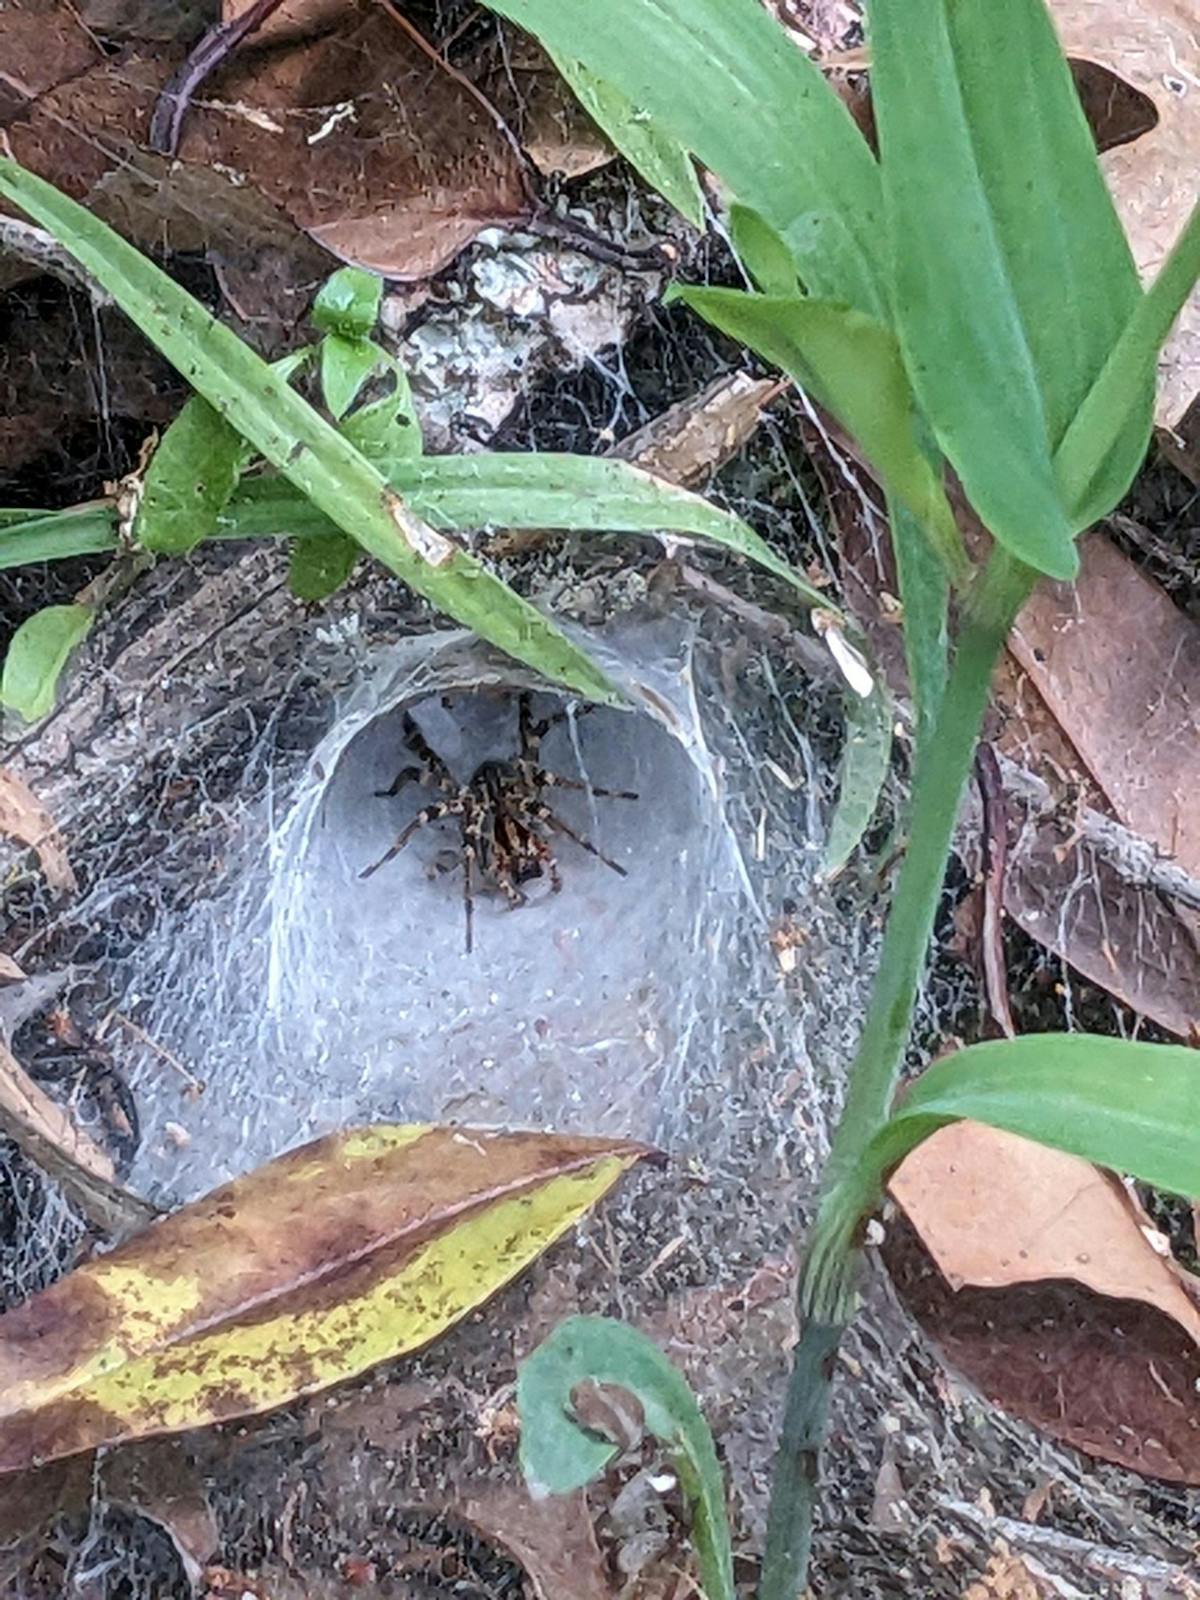 brown and black spider with banded legs tucked into its funnel web on the ground